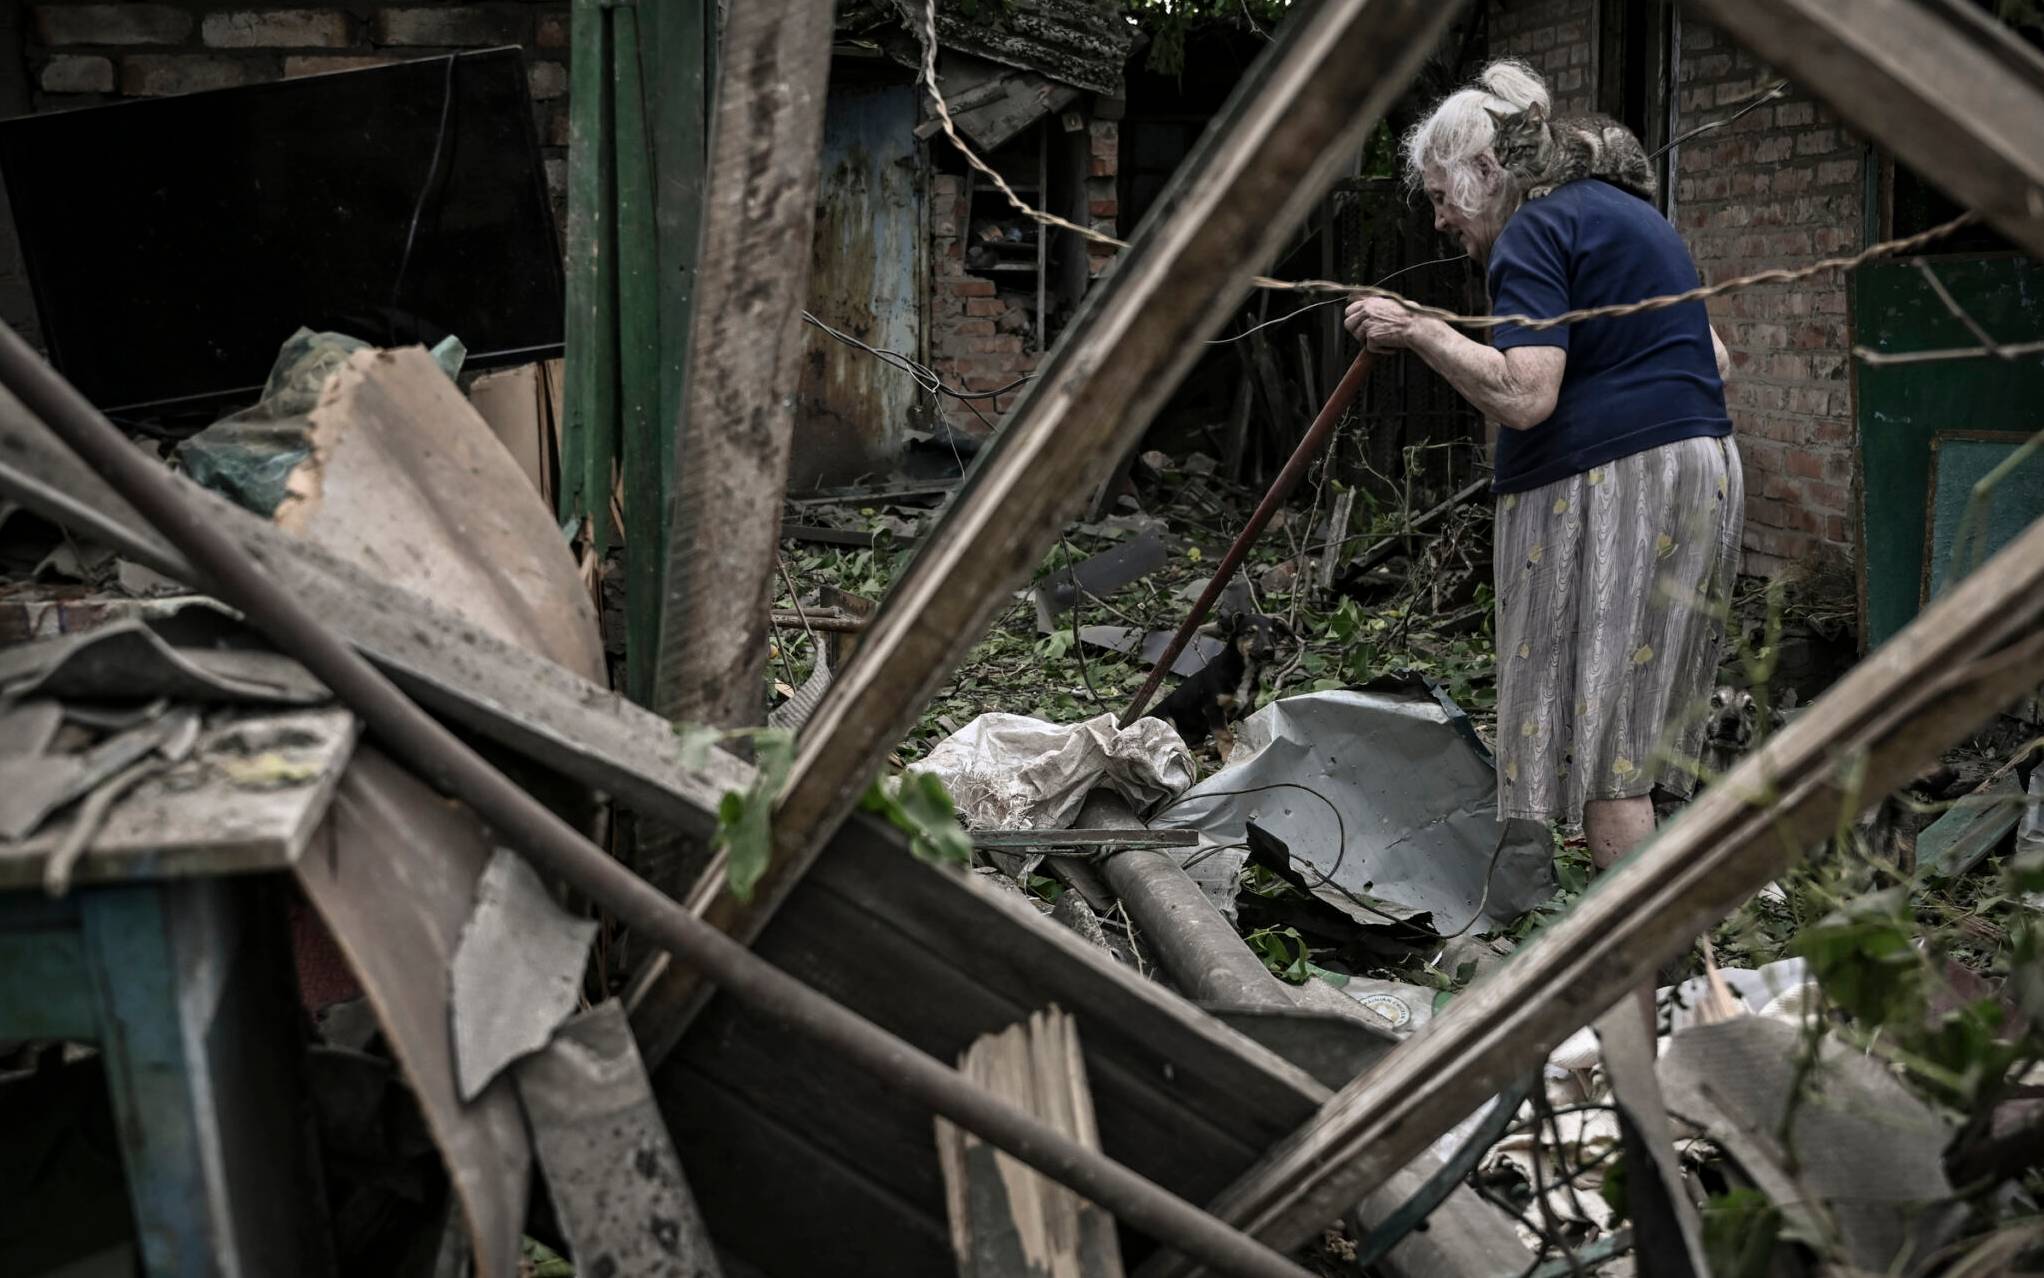 An eldery woman, with a cat on her shoulder, tries to clean her yard from debris after a missile strike killing one old woman in the city of Droujkivka at the eastern Ukrainian region of Donbas on June 5, 2022. (Photo by ARIS MESSINIS / AFP)